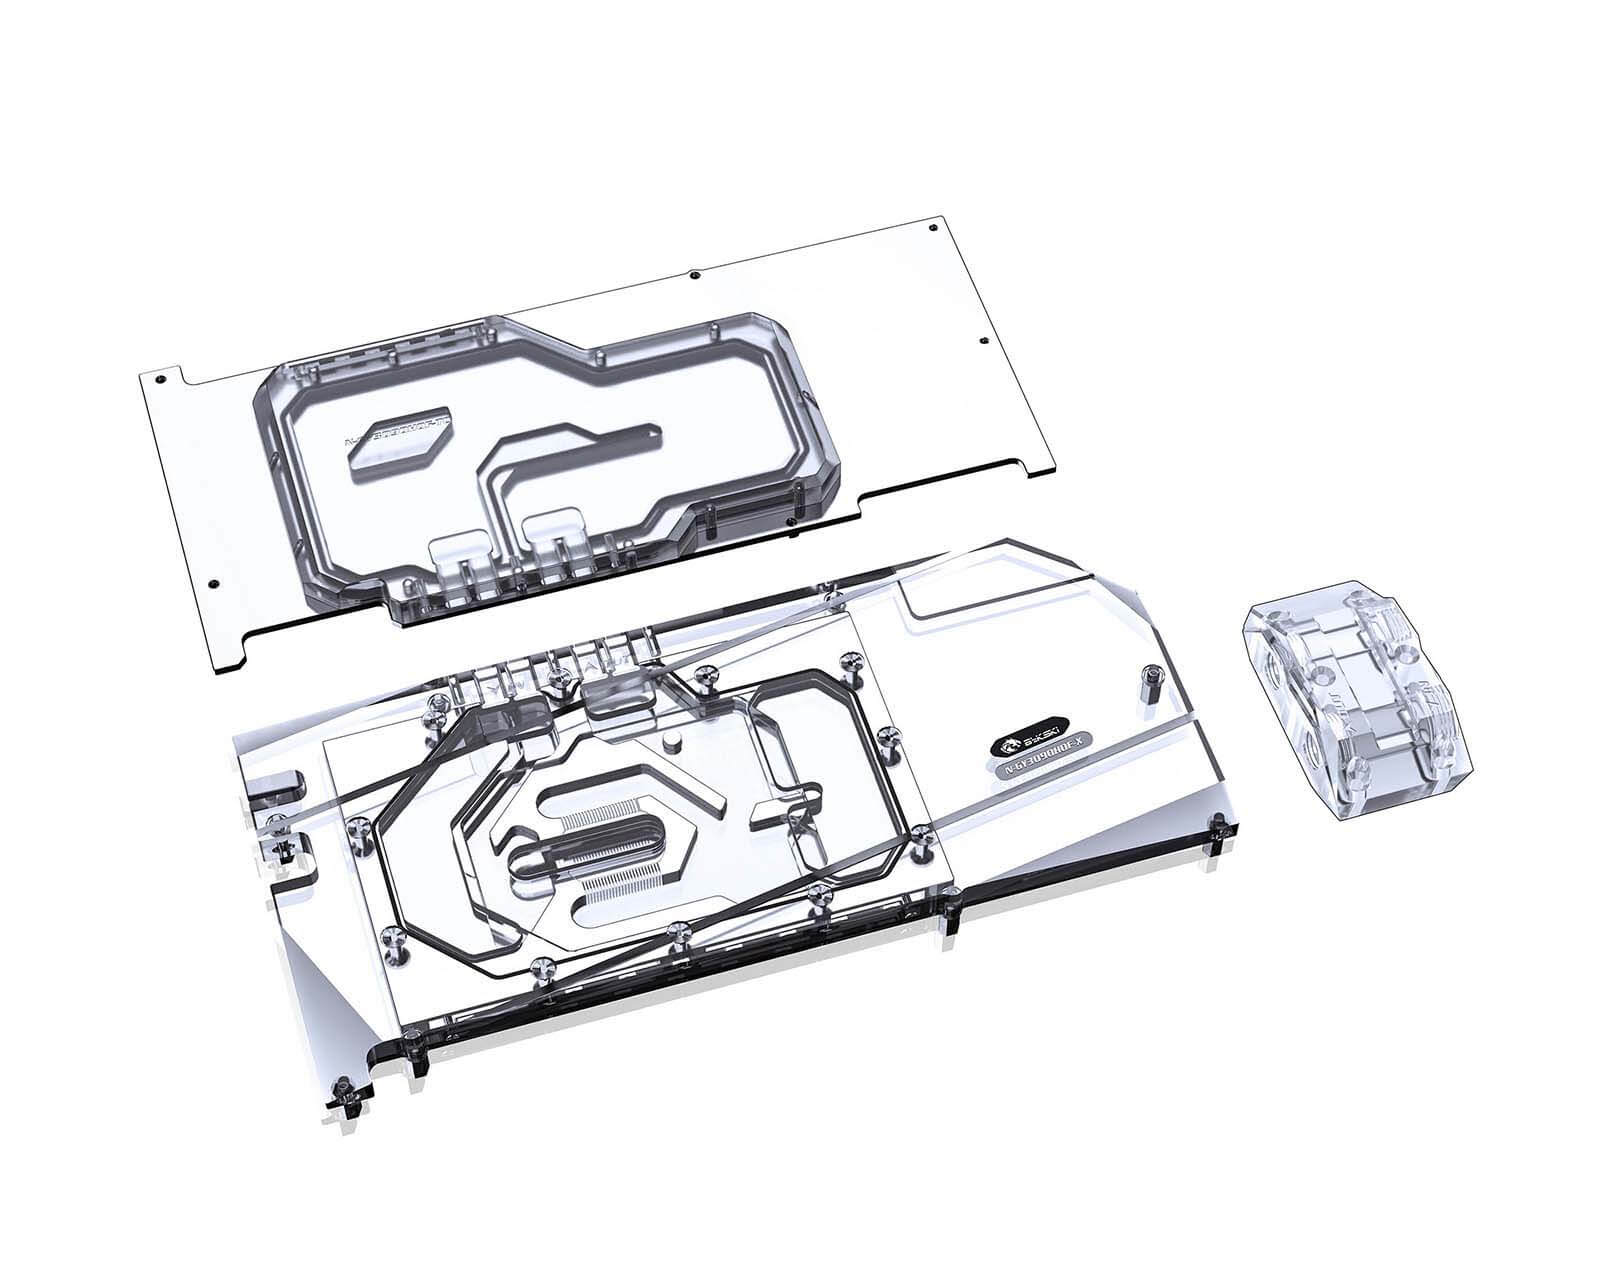 Bykski Full Coverage GPU Water Block w/ Integrated Active Backplate for Zotac RTX 3090 HOF Extreme Limited Edition (N-GY3090HOF-TC) - PrimoChill - KEEPING IT COOL